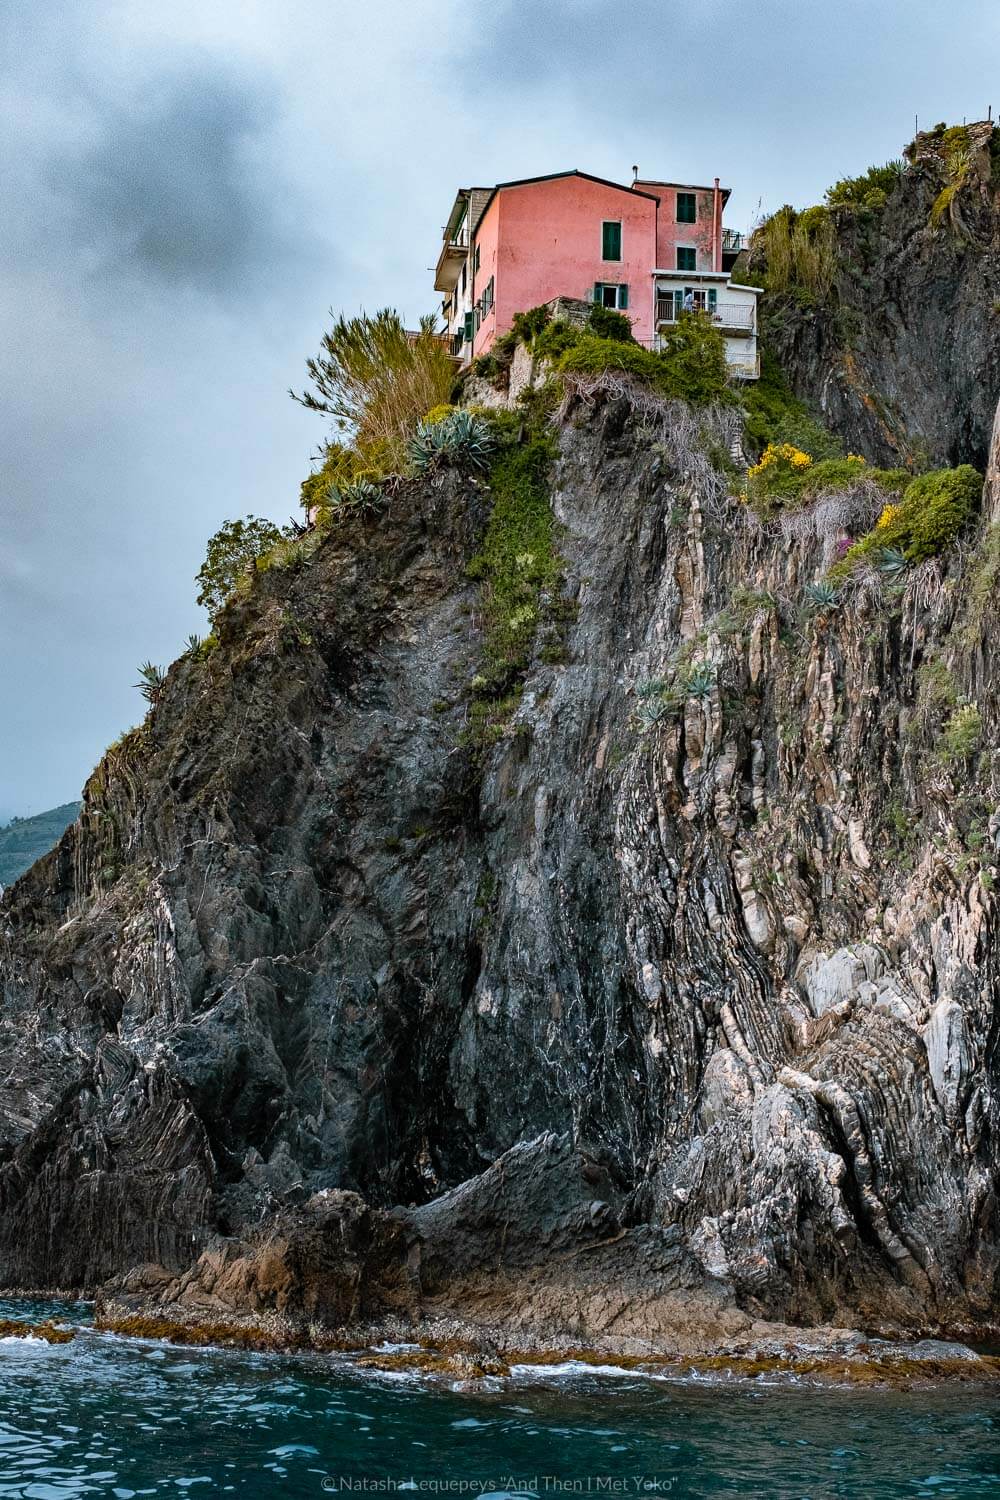 Pink house near Manarola, Cinque Terre. Travel photography and guide by © Natasha Lequepeys for "And Then I Met Yoko". #cinqueterre #italy #travelphotography